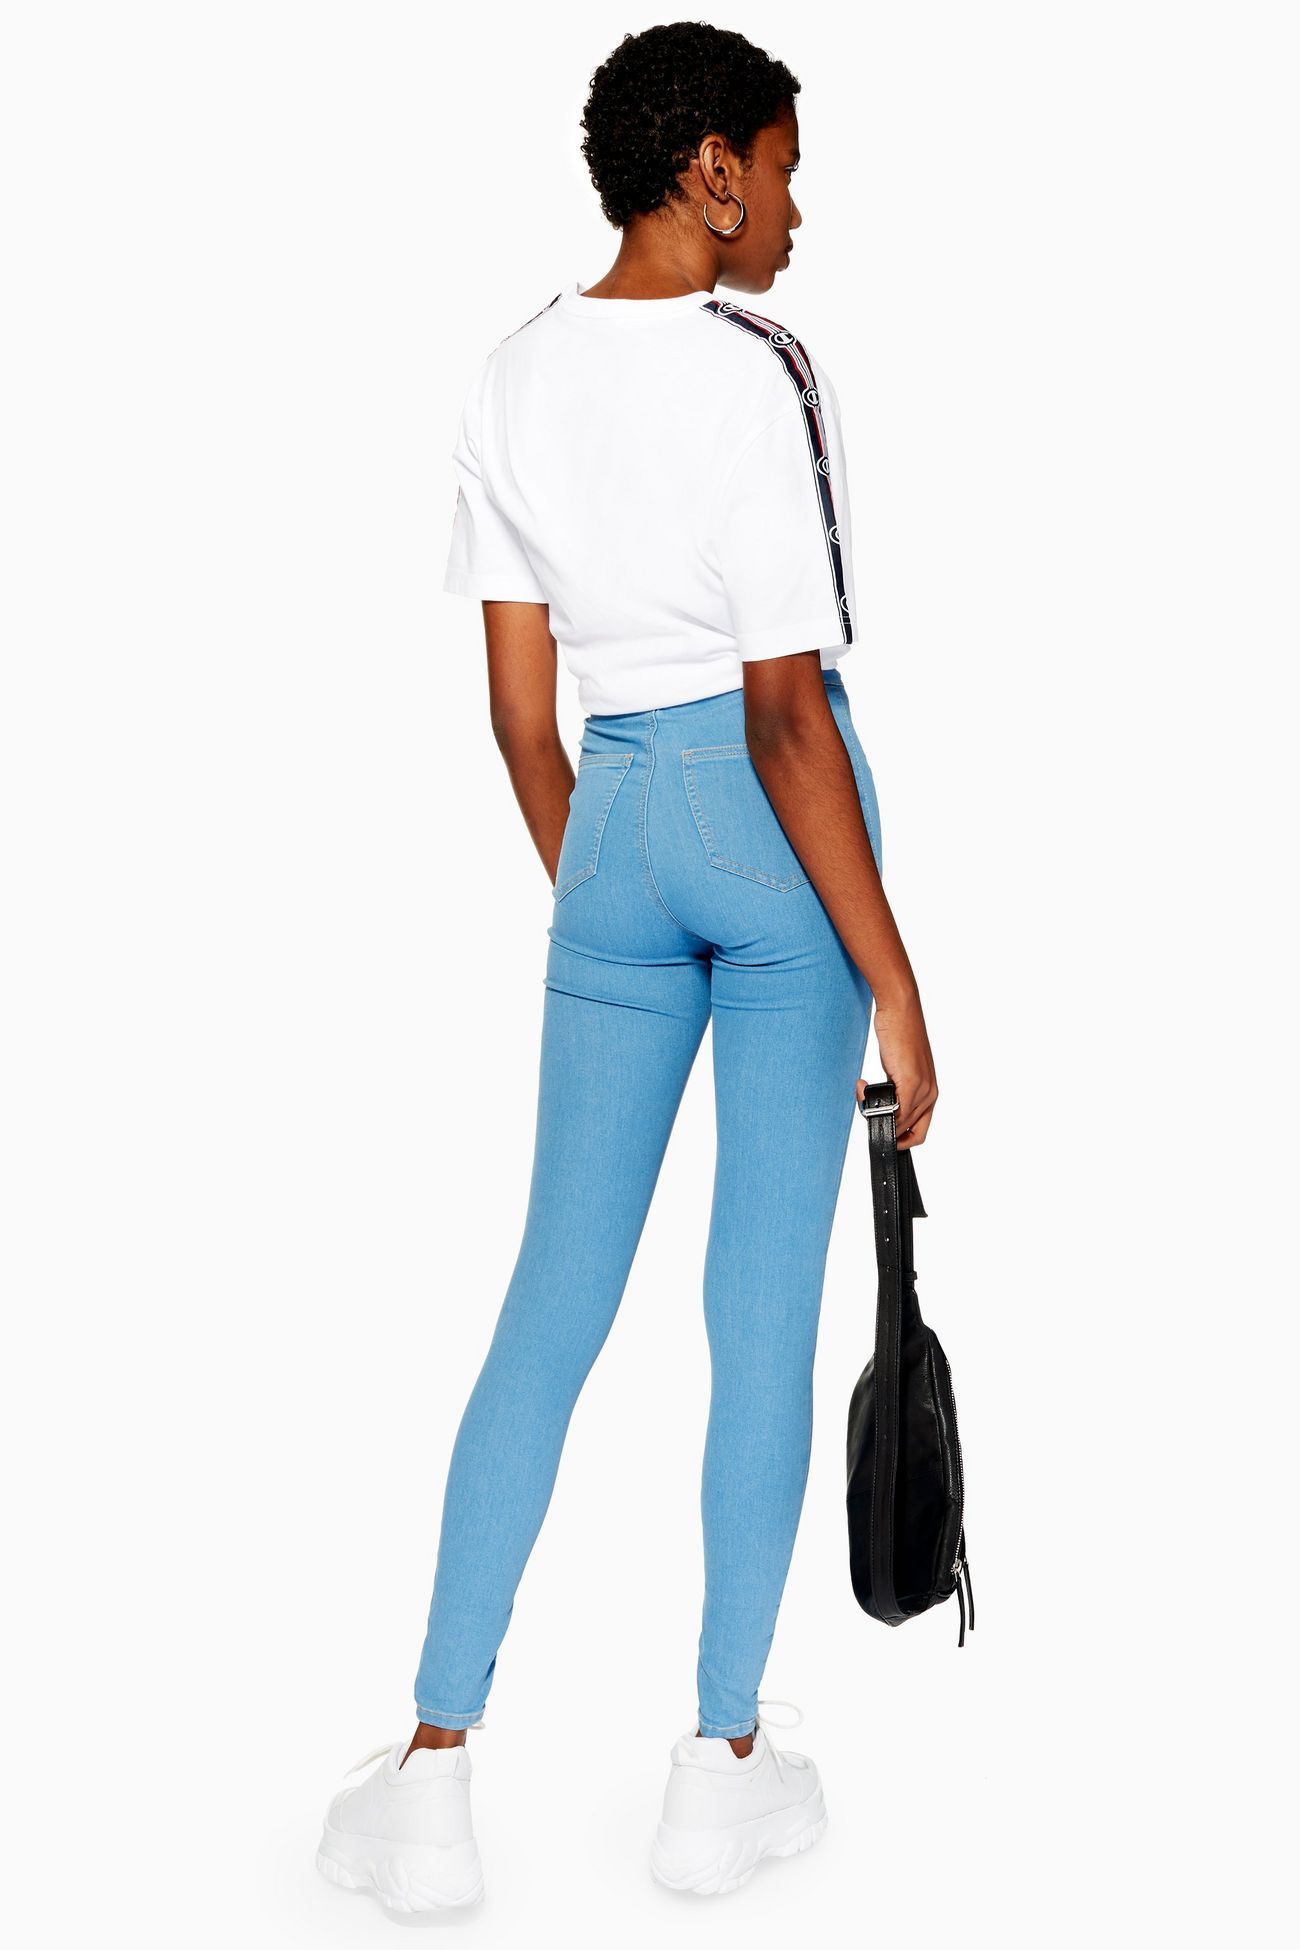 Topshop adds belt loops to Joni jeans after Twitter demand